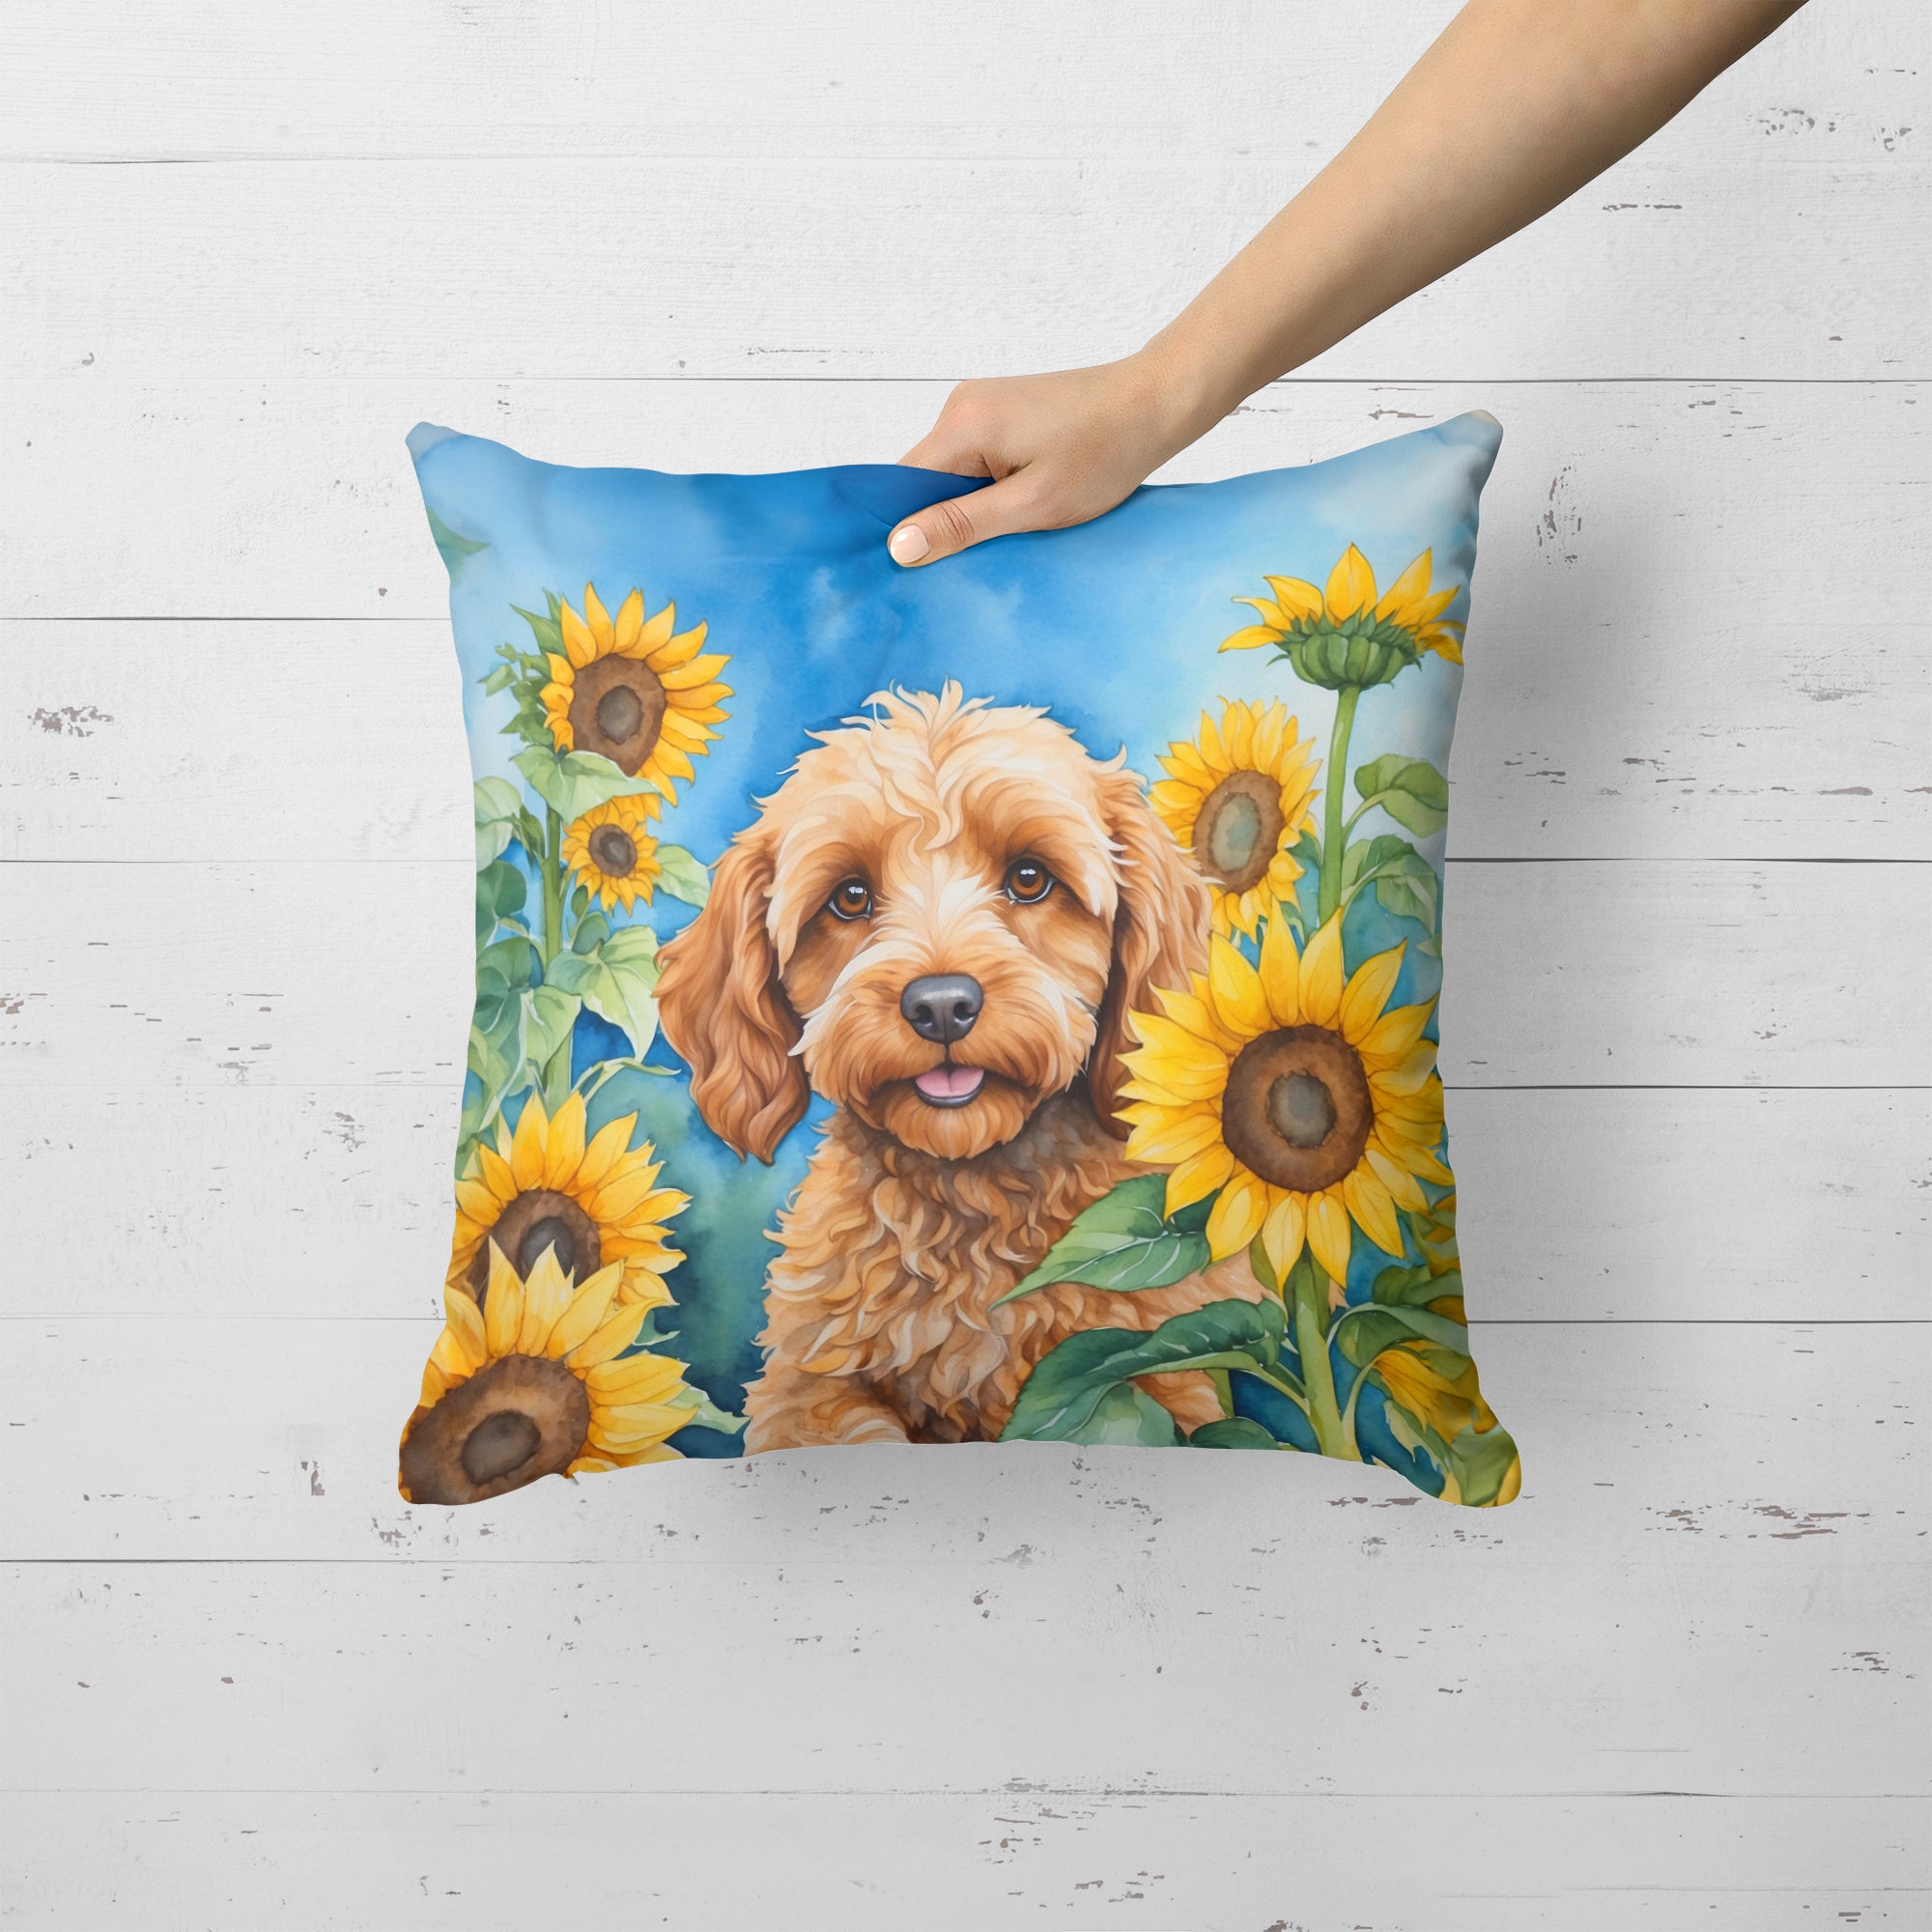 Buy this Cockapoo in Sunflowers Throw Pillow